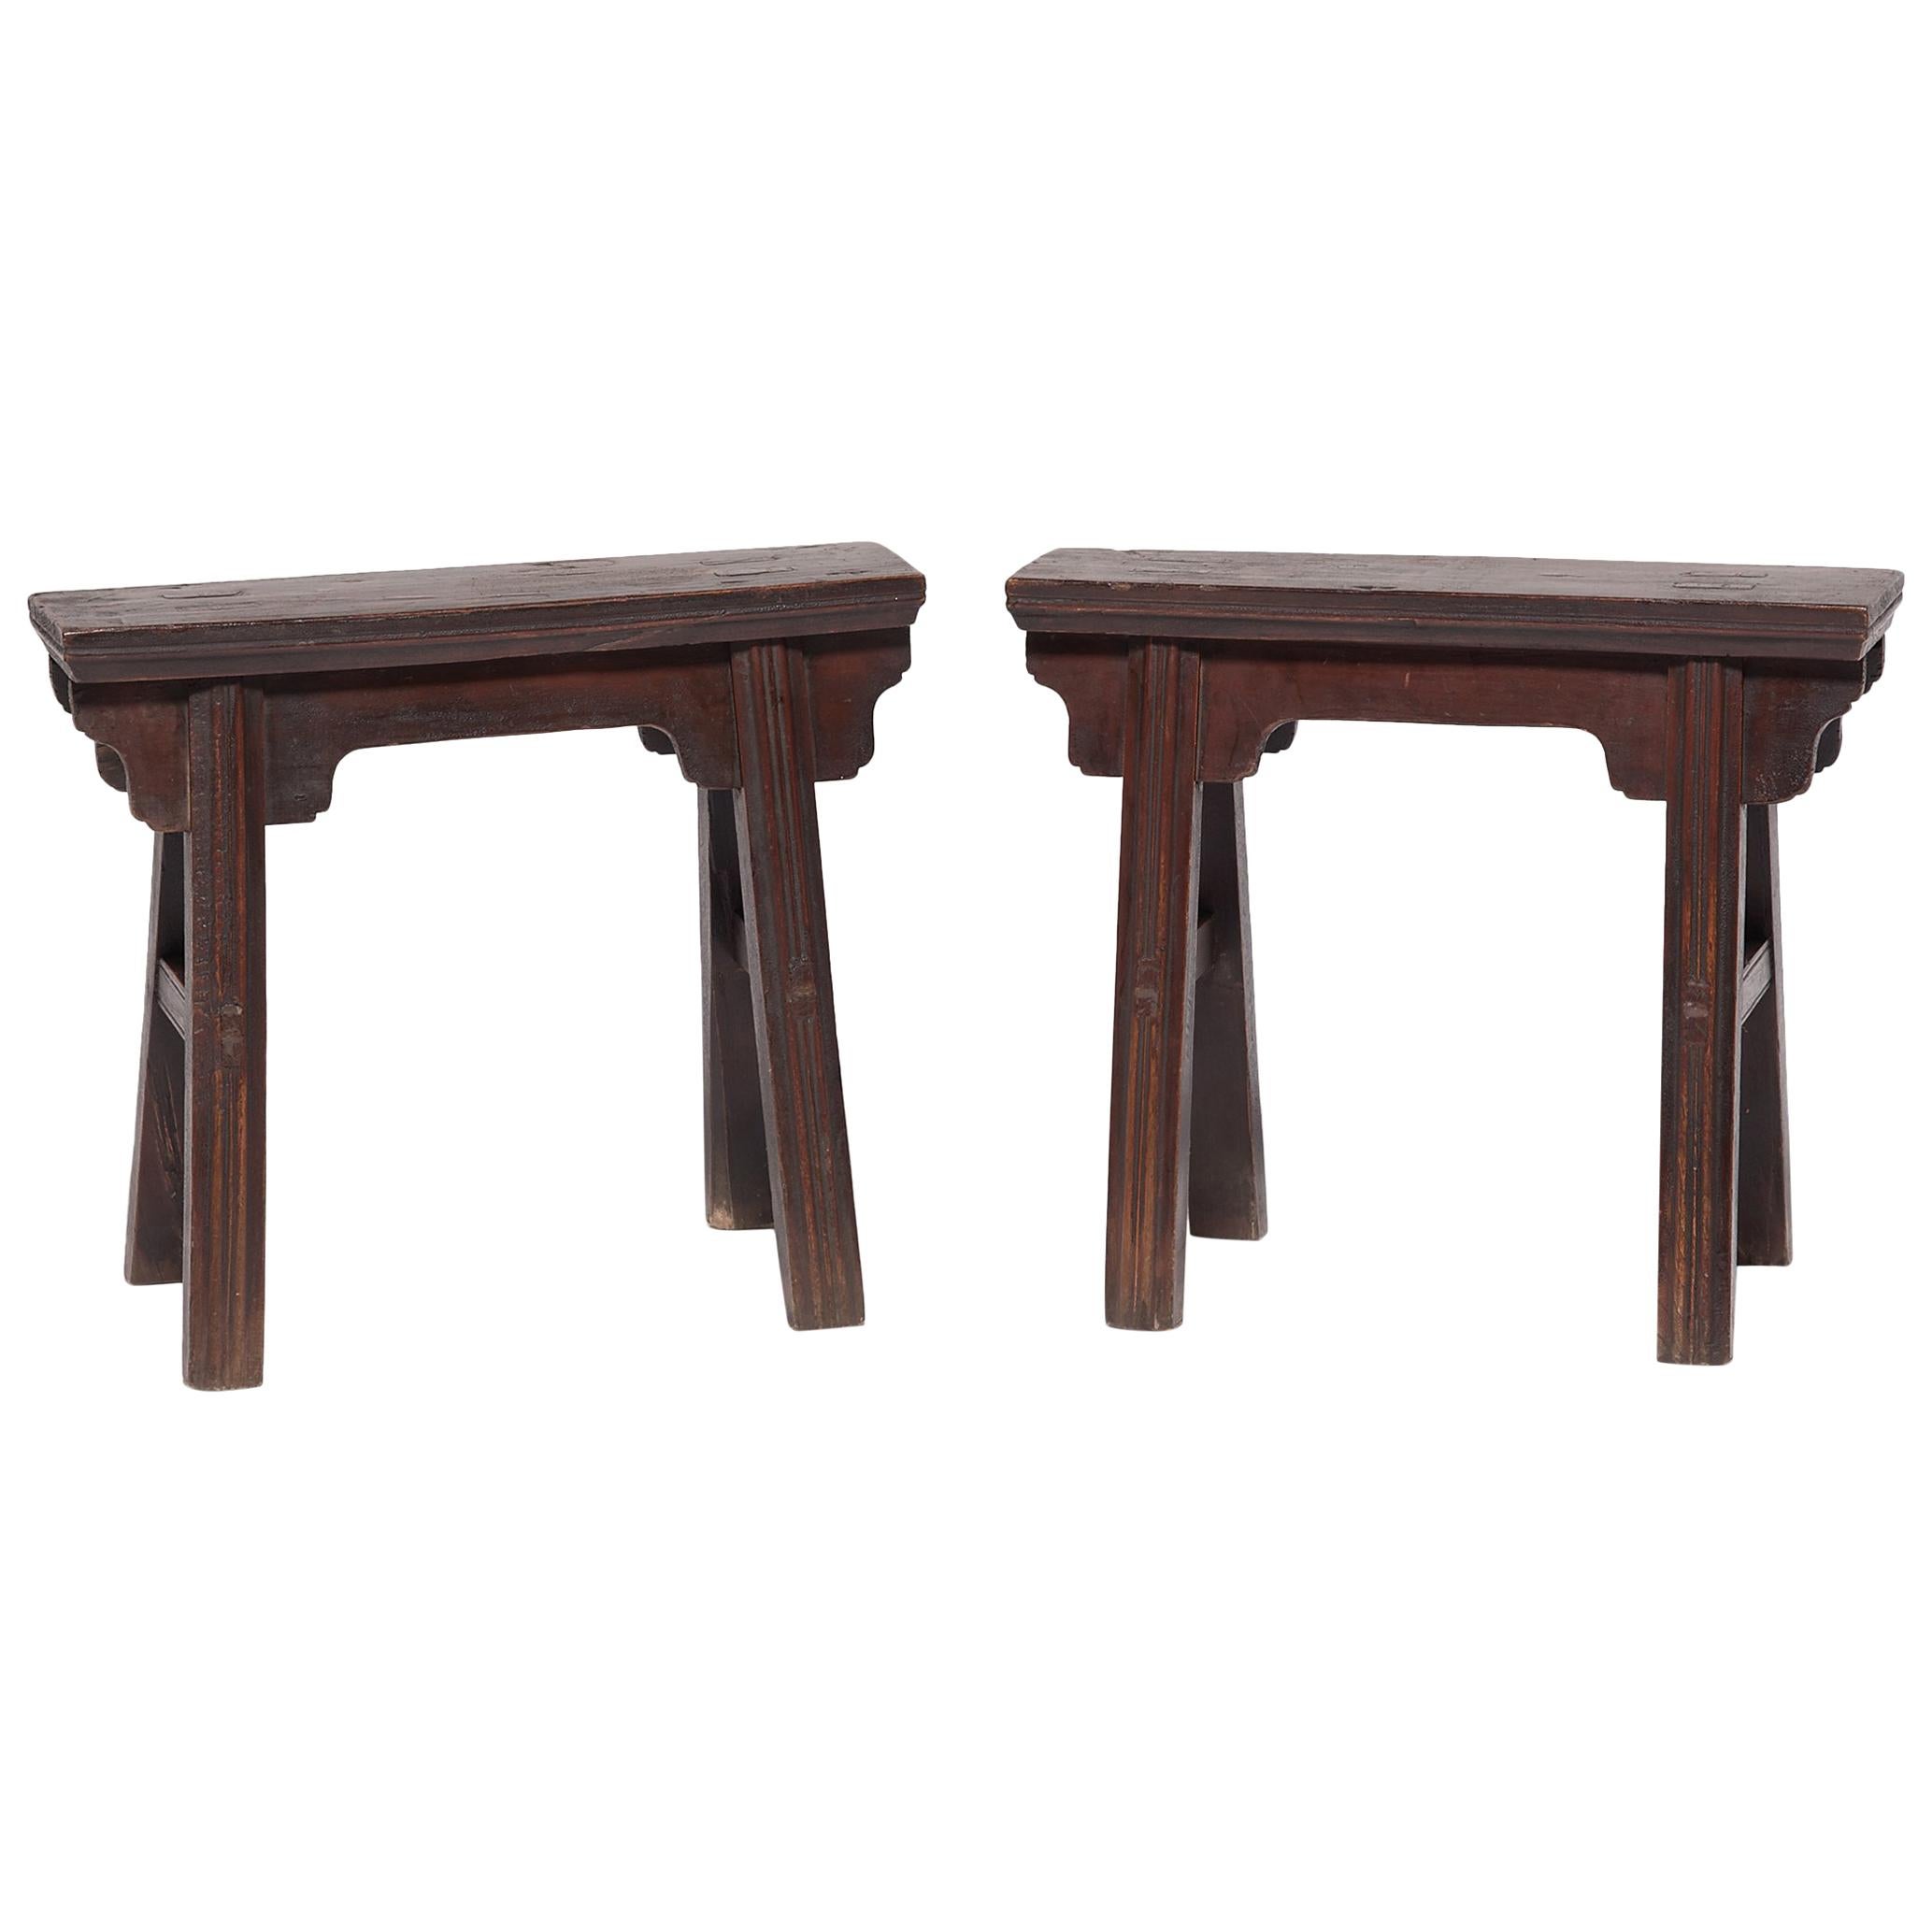 Pair of Chinese Carriage Benches